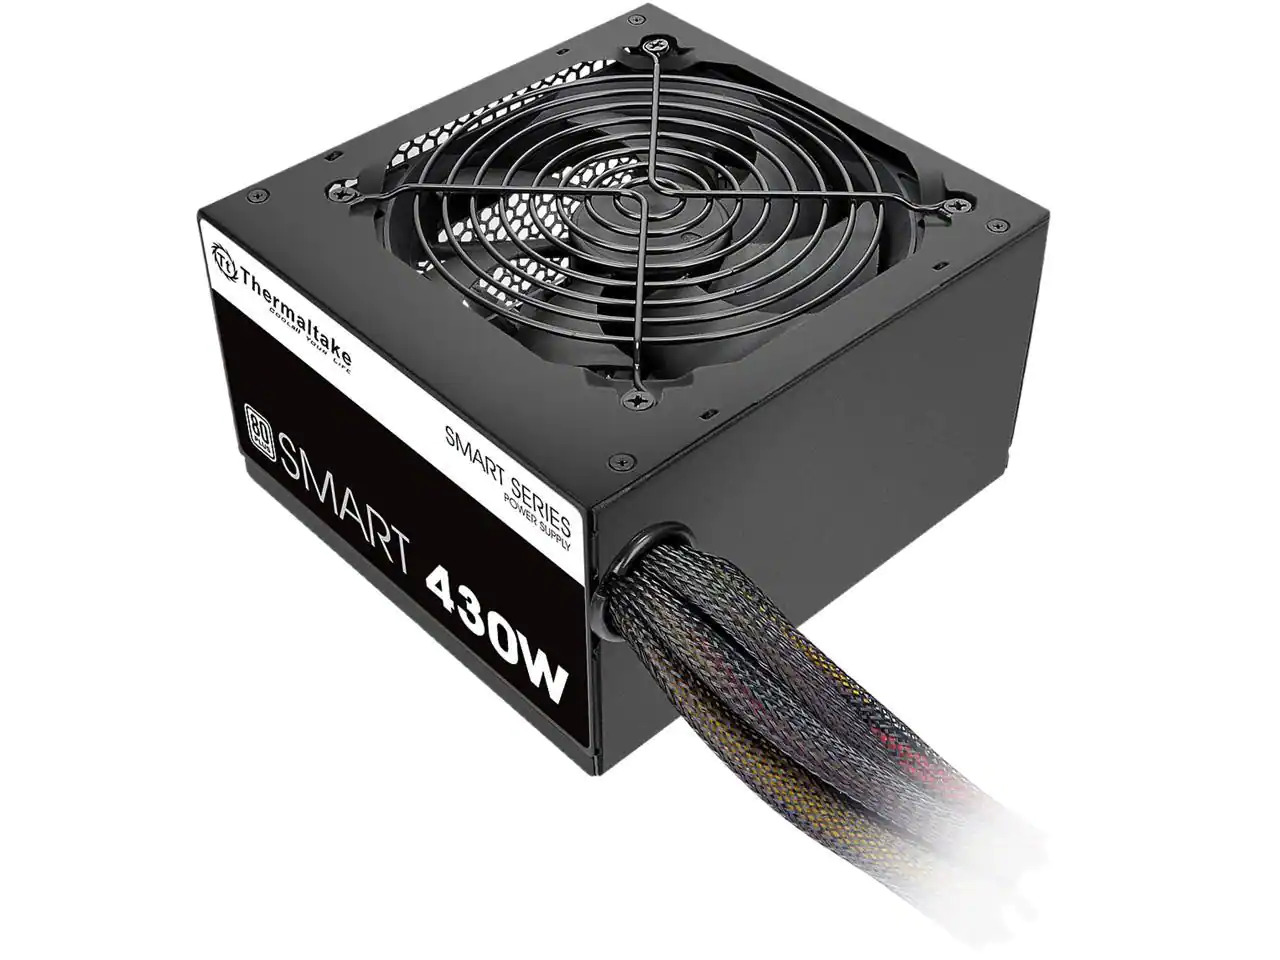 thermaltake-power-supply-deals-as-low-as-19-99-after-10-mir-and